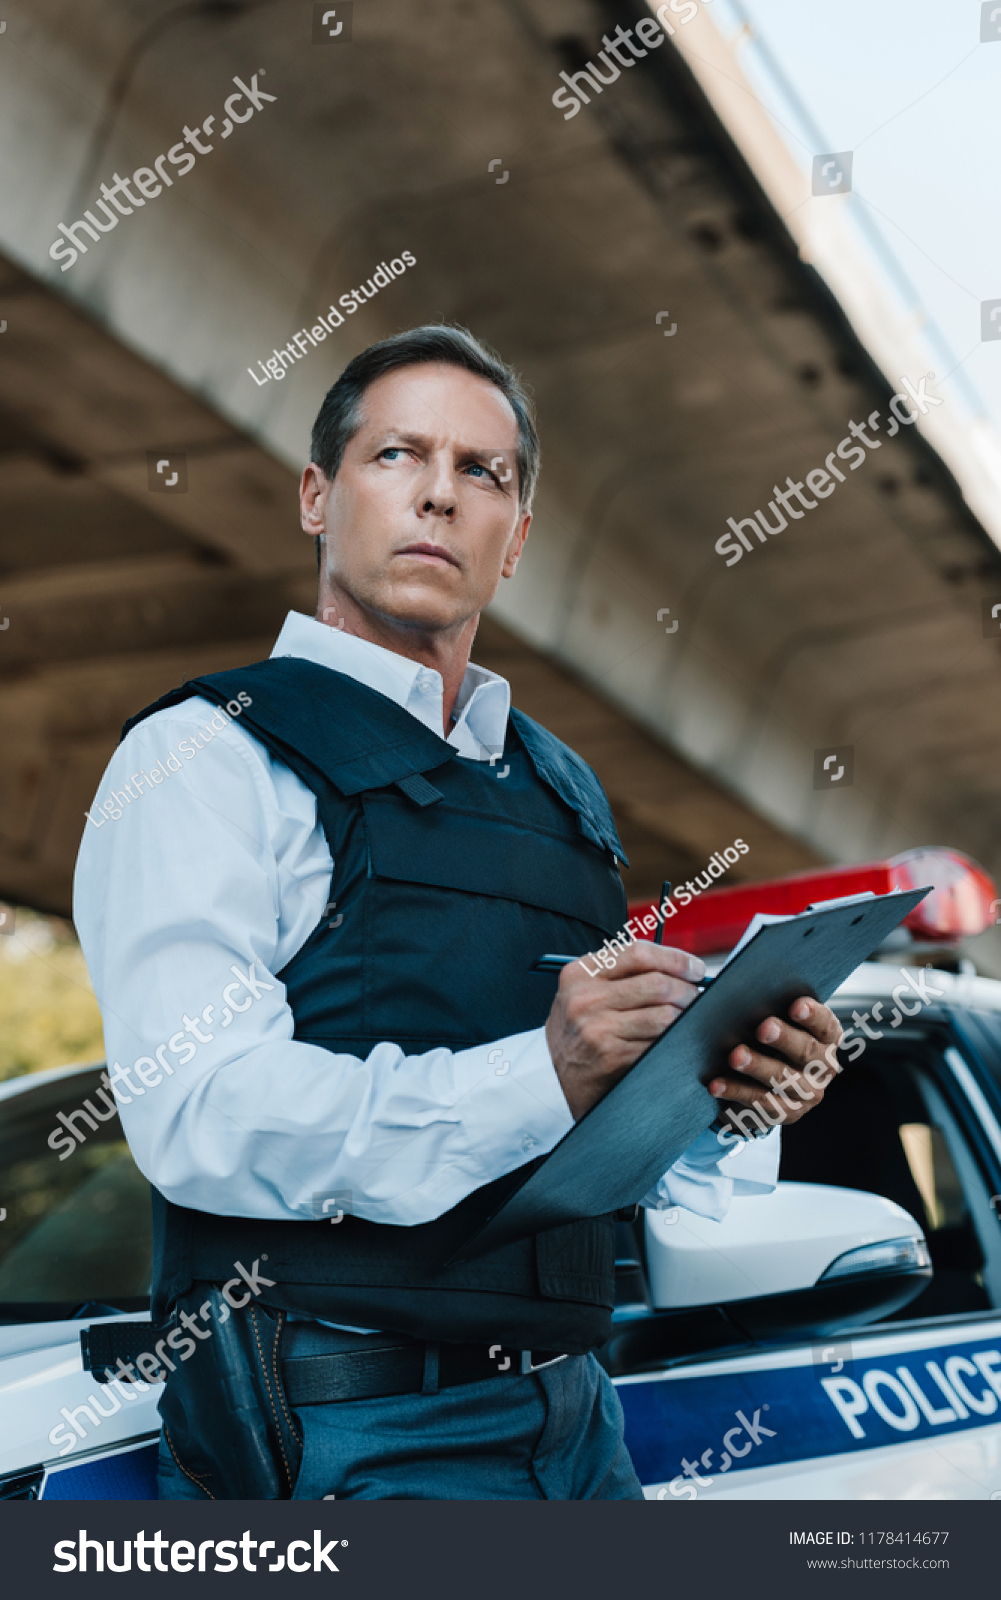 stock-photo-low-angle-view-of-middle-aged-male-police-officer-in-bulletproof-vest-writing-in-clipboard-near-car-1178414677